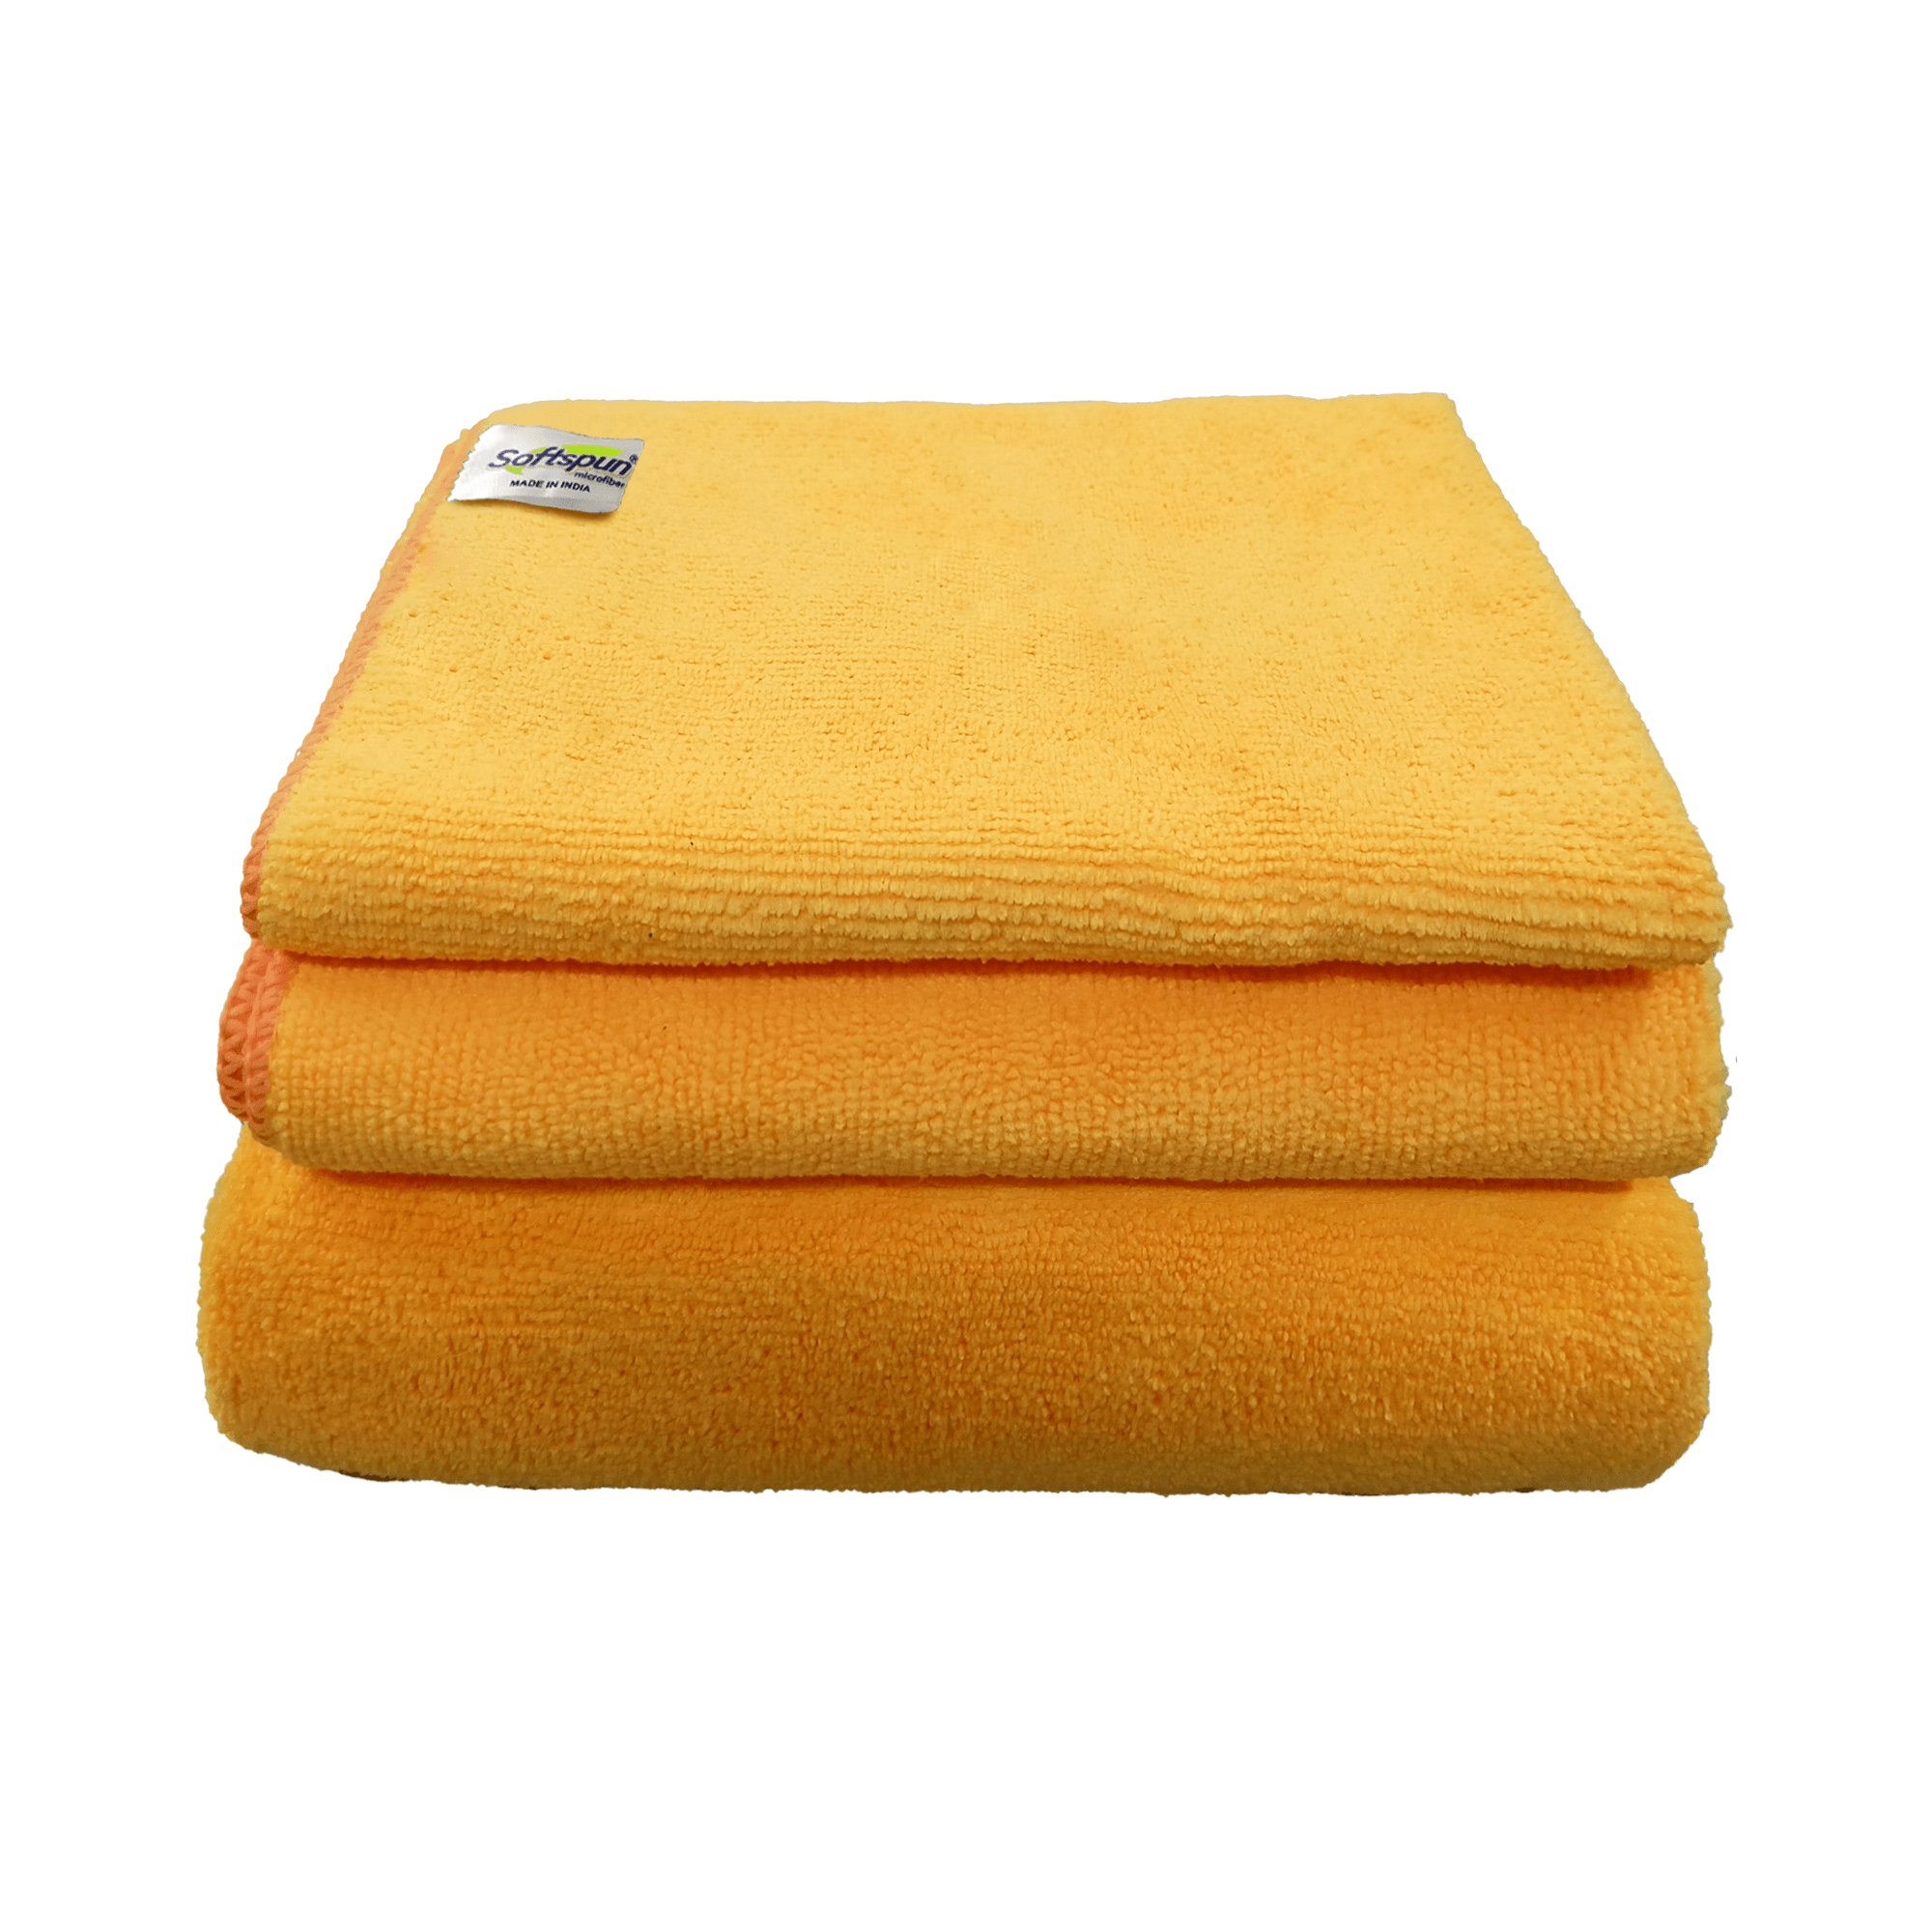 SOFTSPUN Microfiber Baby Face & Bath Towel Set of 3 Pieces, 340 GSM, Super Soft & Comfortable for Newborn Babies, Quick Drying, Ultra Absorbent in Large size.